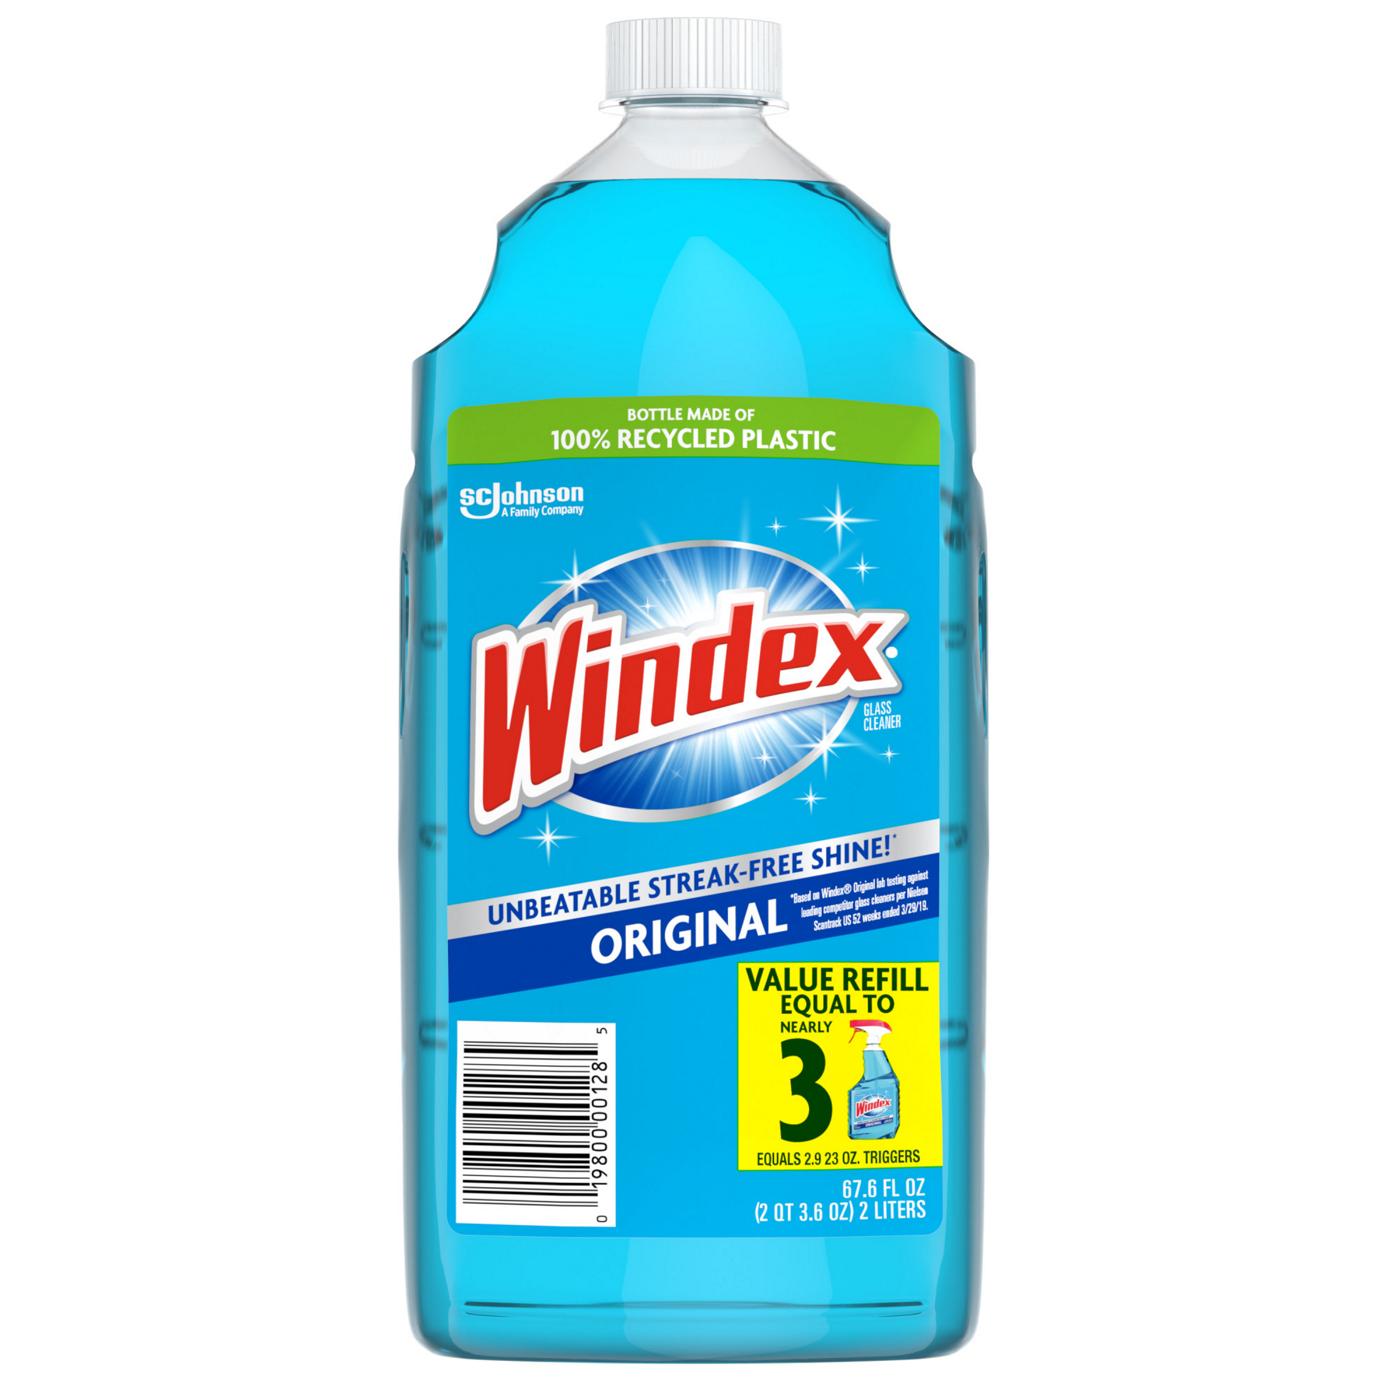 Windex Original Value Refill Glass Cleaner; image 1 of 9